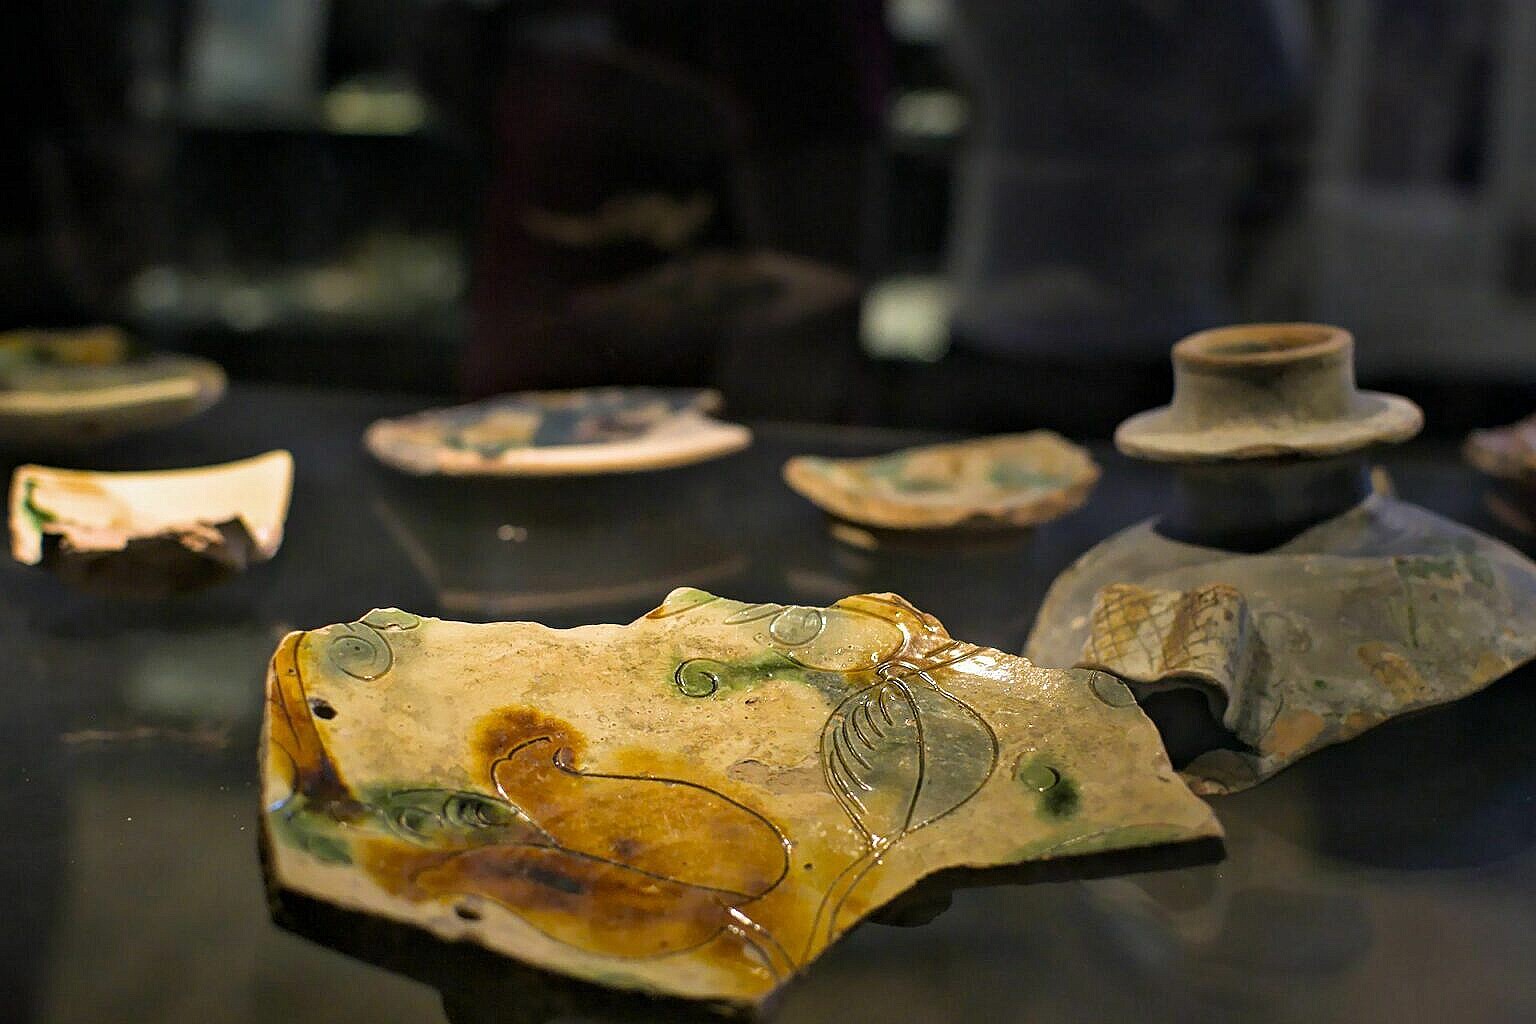 Broken pottery from the 1500s found at the Lazzaretto Nuovo